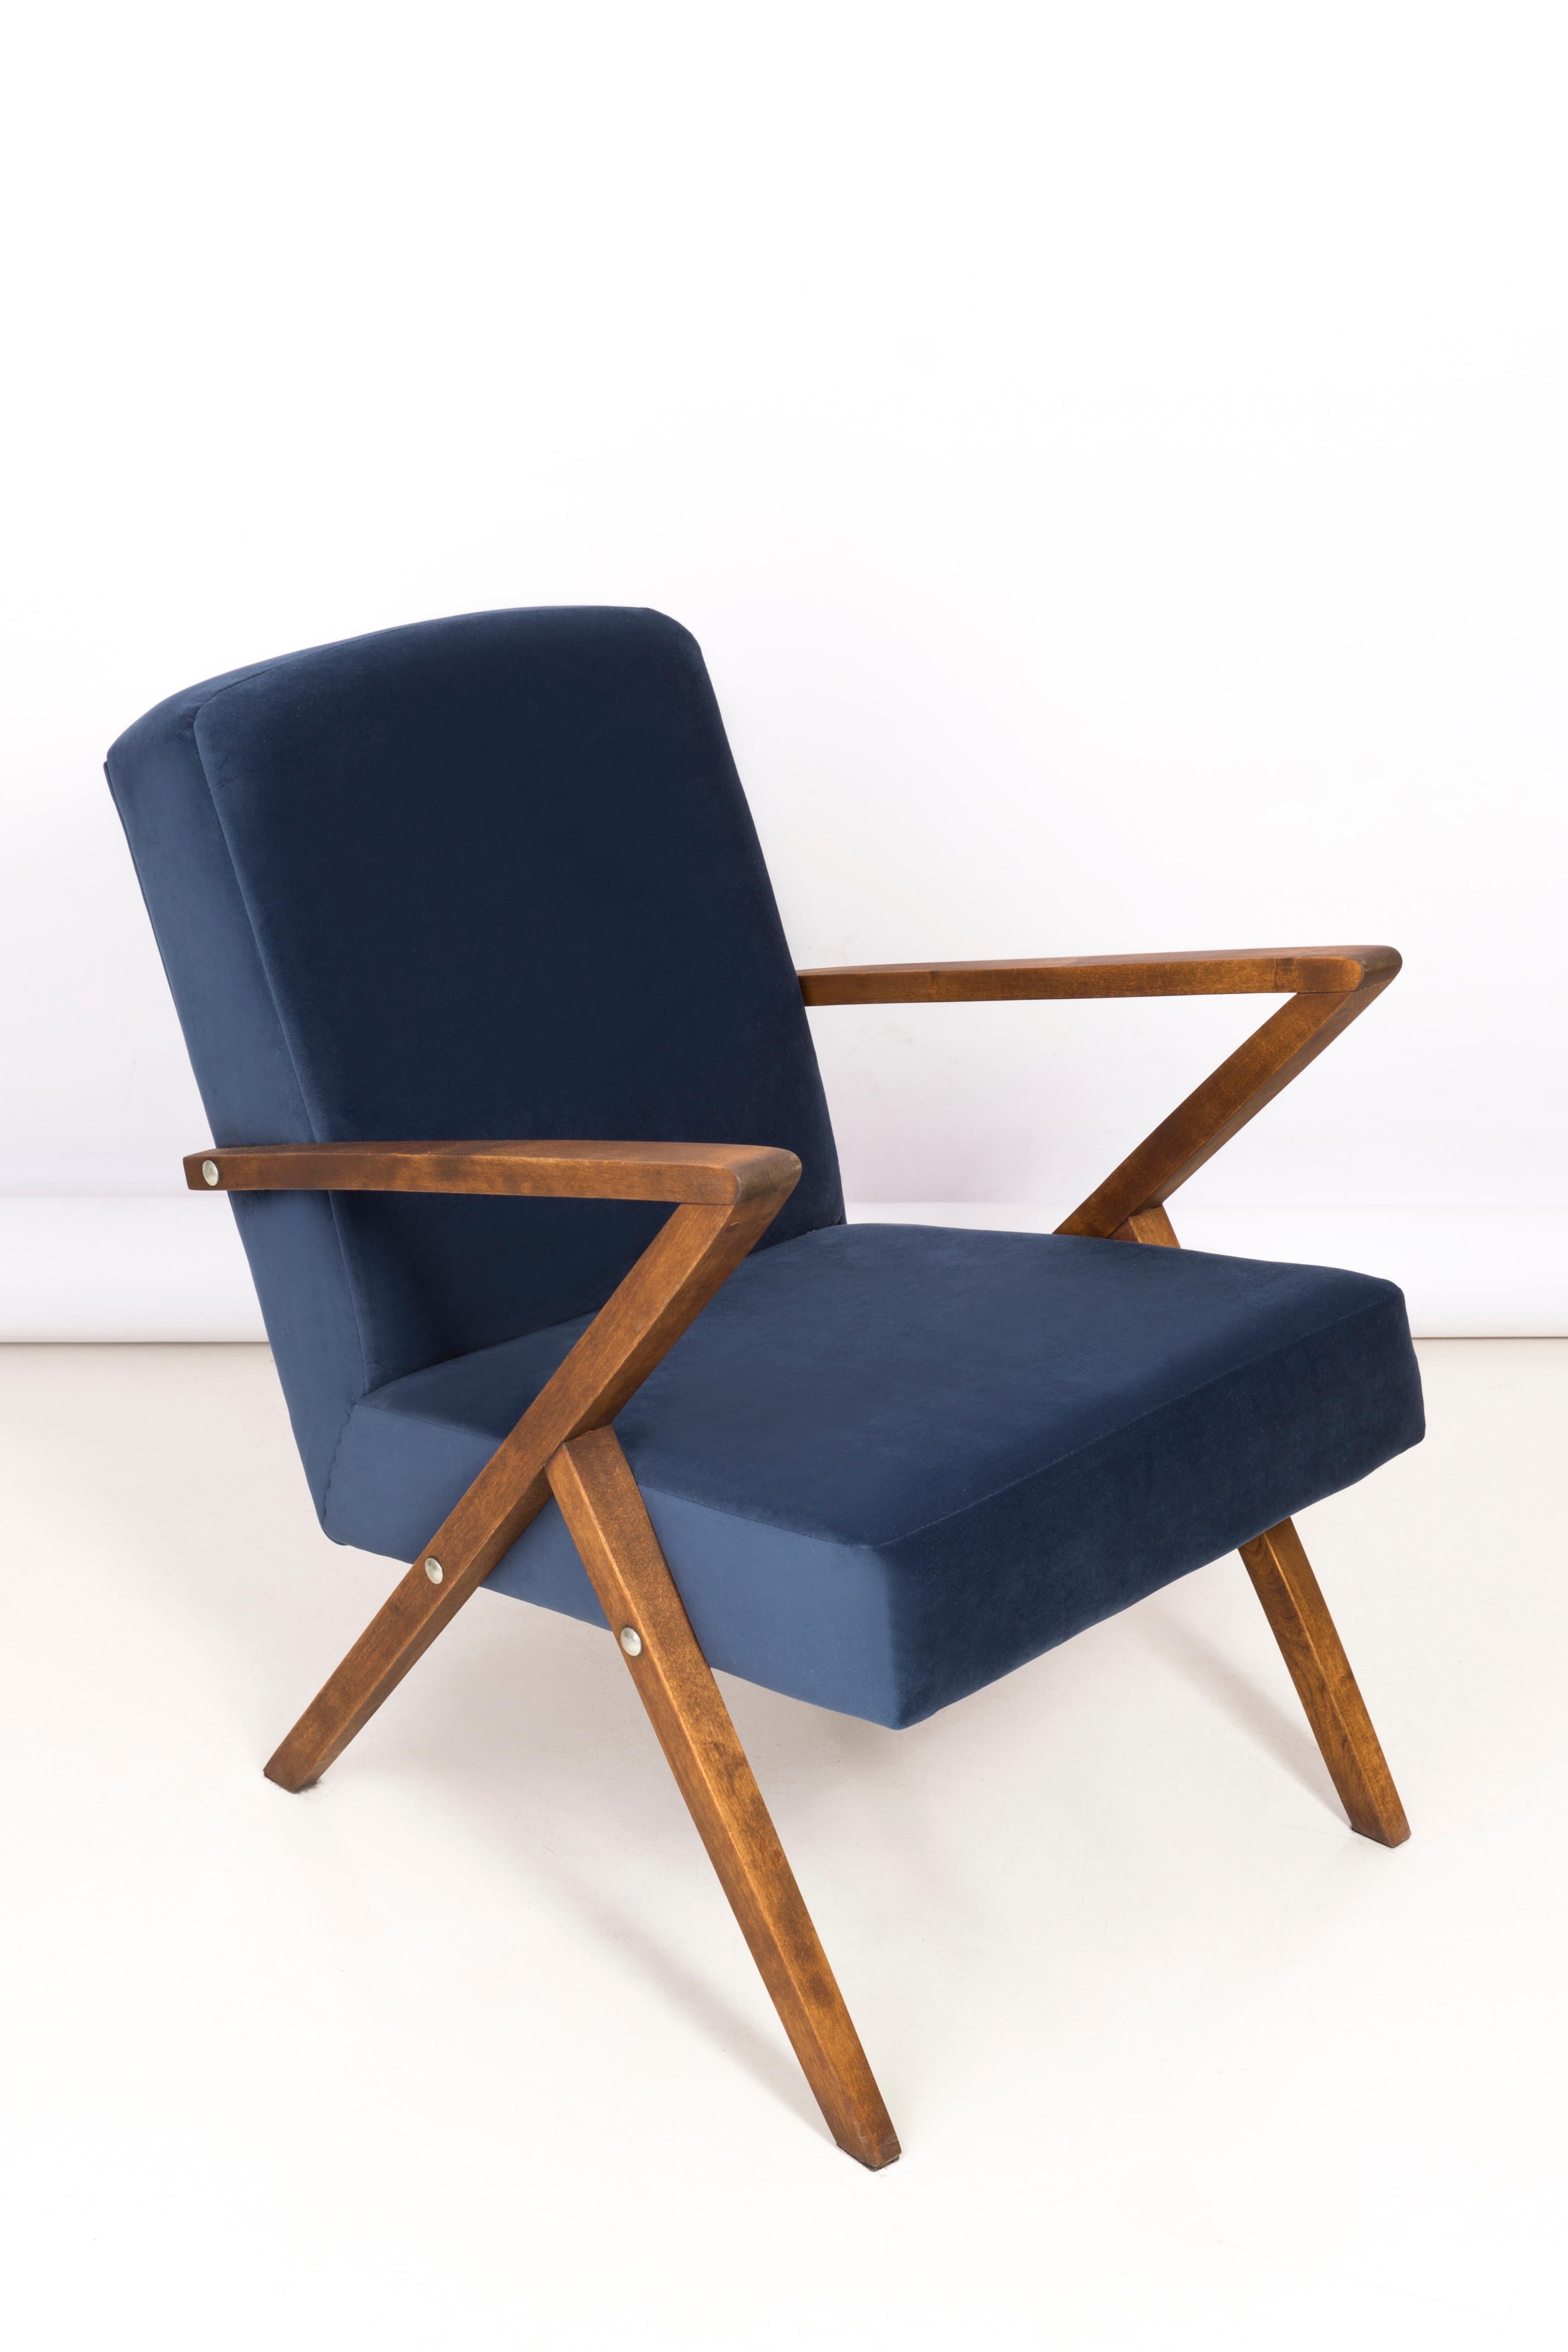 Armchair manufactured at the Bydgoszcz Renewal Cooperative in the 1970s. The armchair are after a comprehensive renovation of carpentry and upholstery. The wood has been cleaned, cavities completed, painted with dark walnut stain, finished with